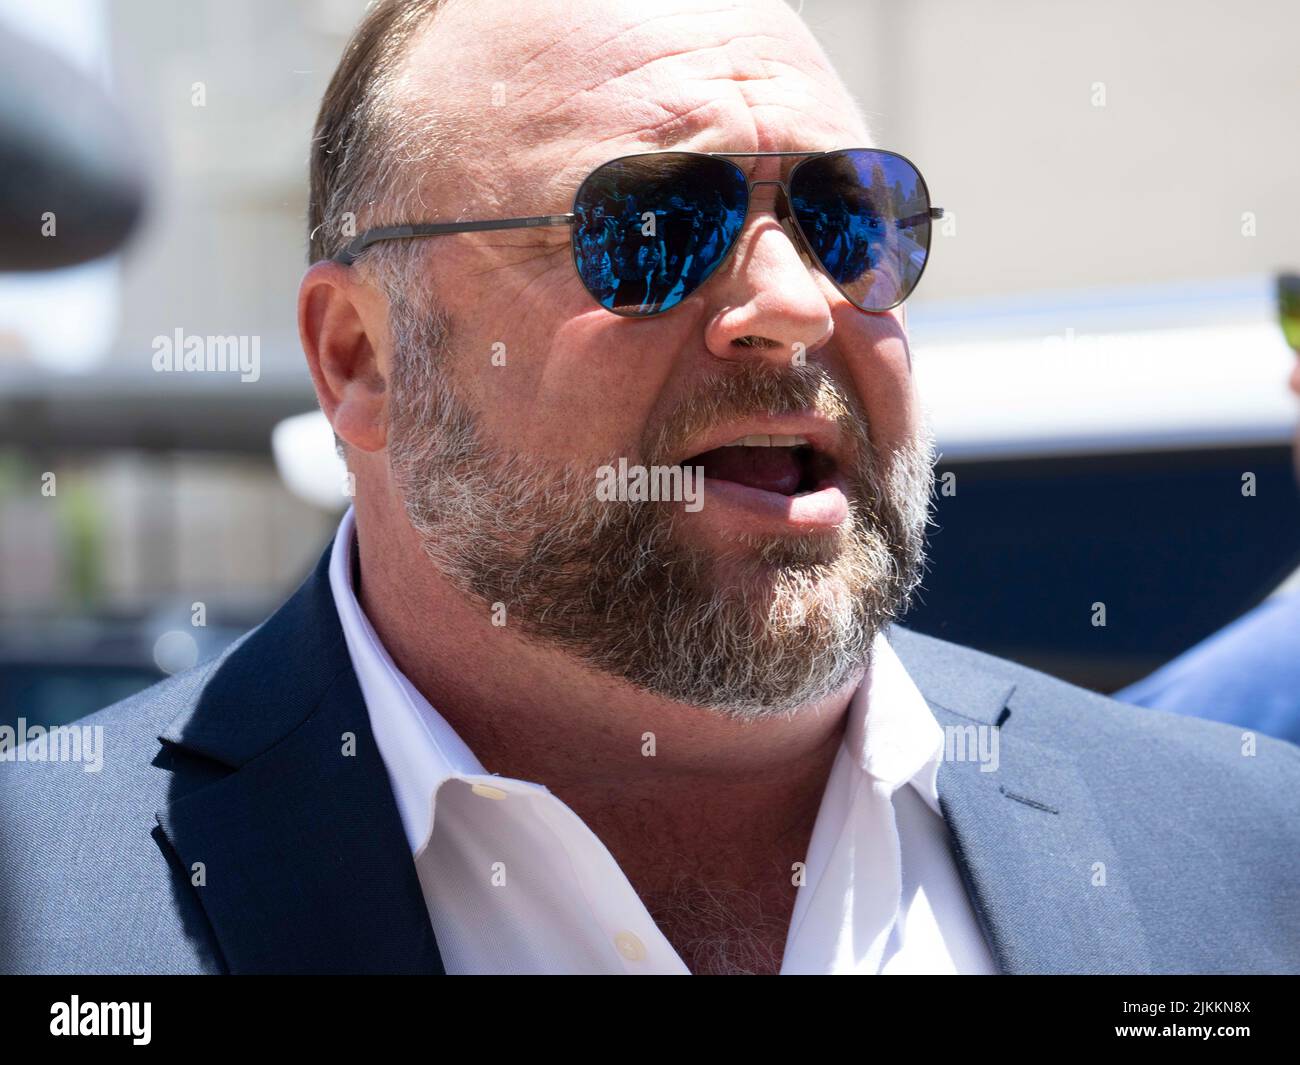 Austin, United States. 02nd Aug, 2022: Flanked by several bodyguards, InfoWars head ALEX JONES arrives at the Travis County Courthouse for afternoon testimony in his defamation trial in Day 6 on August 2, 2022. Jones has been found guilty for defaming families in the 2012 Sandy Hook school massacre. The jury is to decide whether to award up to $150 million to Sandy Hook families. Credit: Bob Daemmrich/Alamy Live News Stock Photo